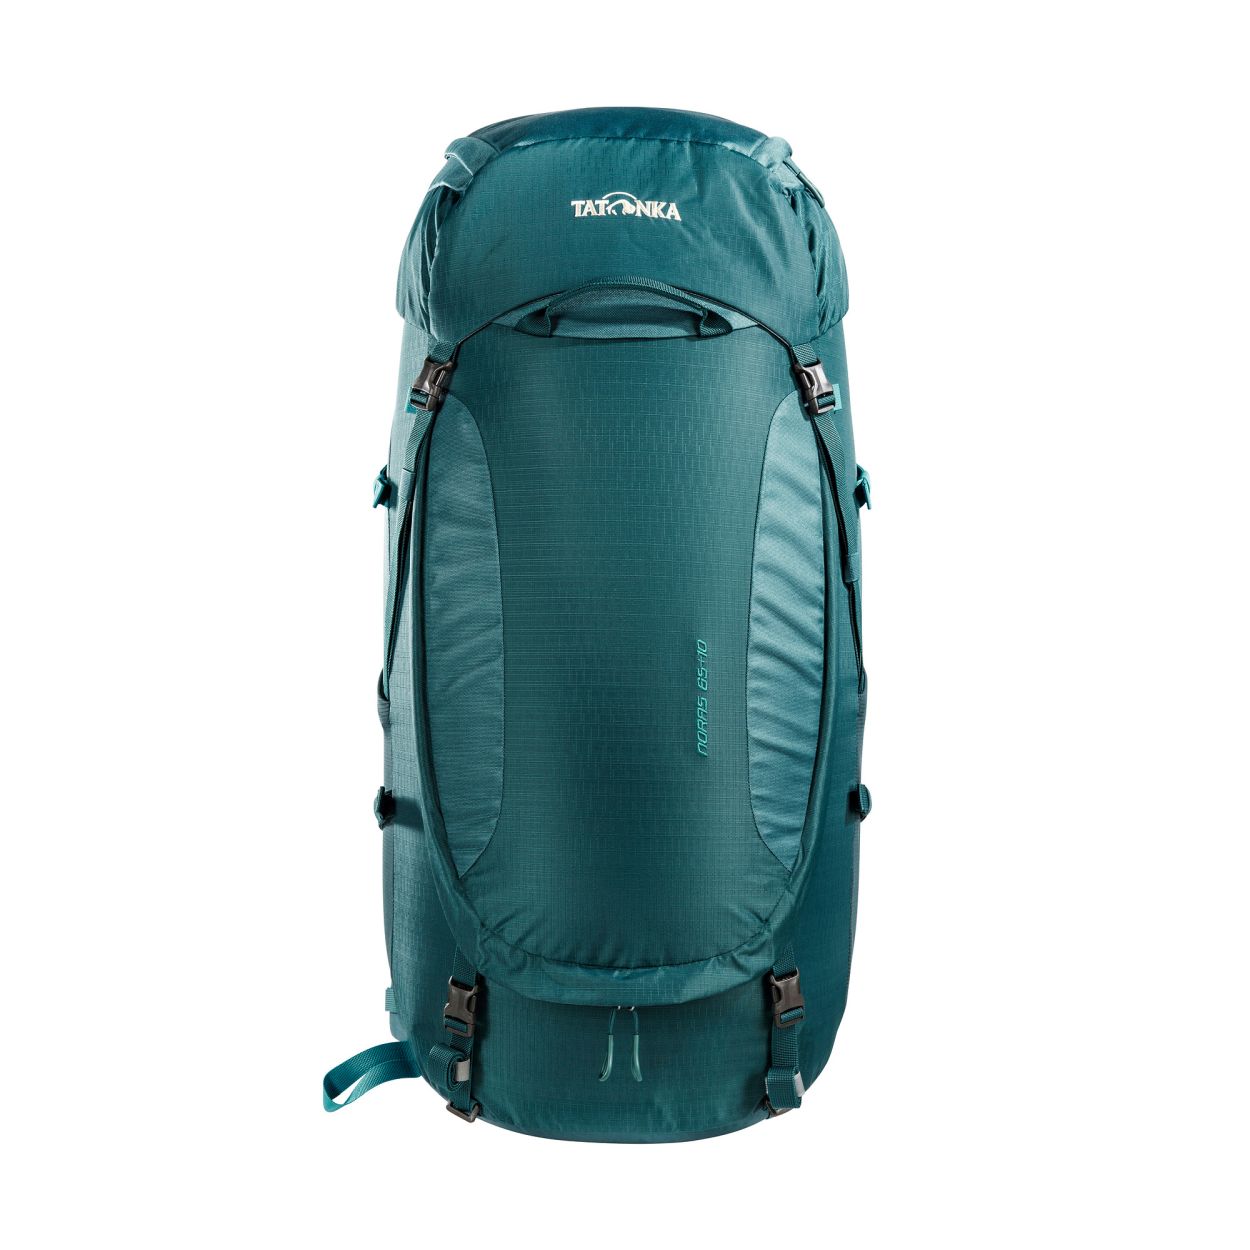 Noras 65+10, teal green